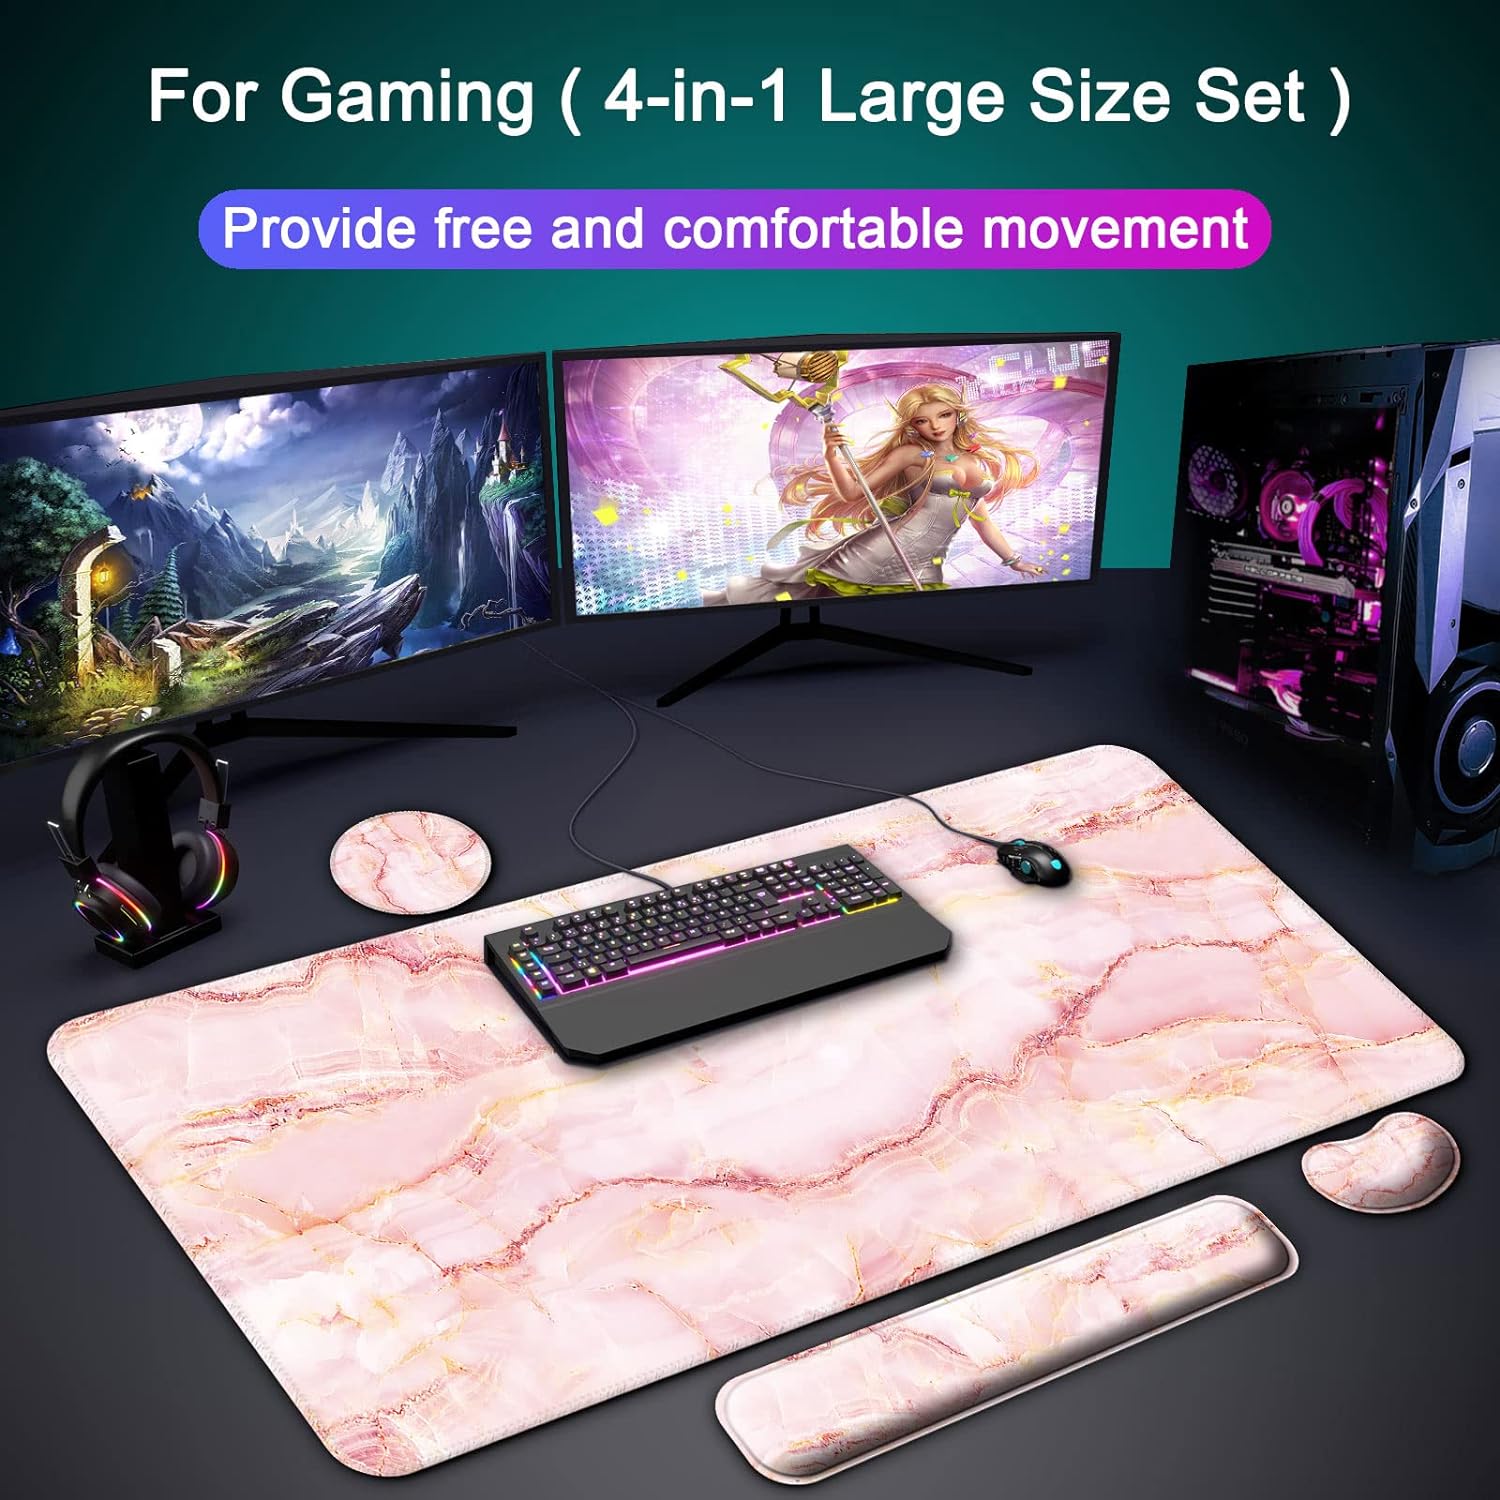 Keyboard Wrist Rest and Desk Mouse Pad with Wrist Support (4 PCS Set ) , Large Gaming Extended XXL Desk Pad Table Mat ,Mousepad with Ergonomic Wrist Rest for Desktop Computer -Pink Marble